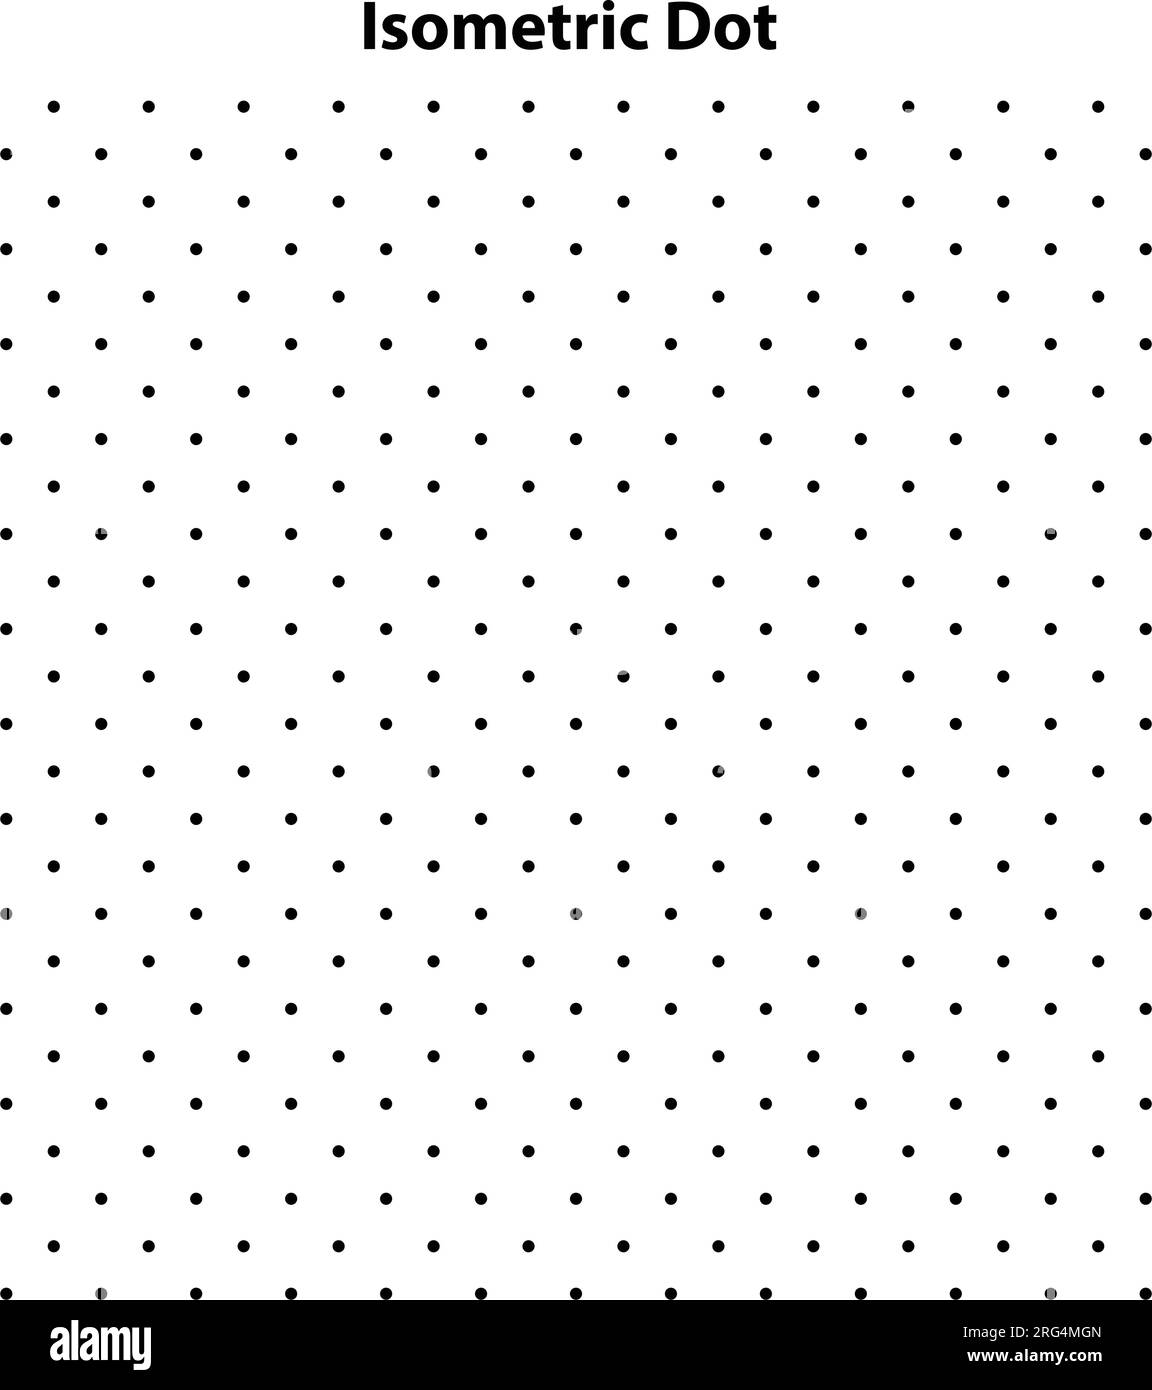 https://c8.alamy.com/comp/2RG4MGN/dot-grid-vector-paper-graph-paper-on-white-background-isometric-dot-black-isometric-projection-mesh-for-drawing-vector-the-world-of-geometry-2RG4MGN.jpg